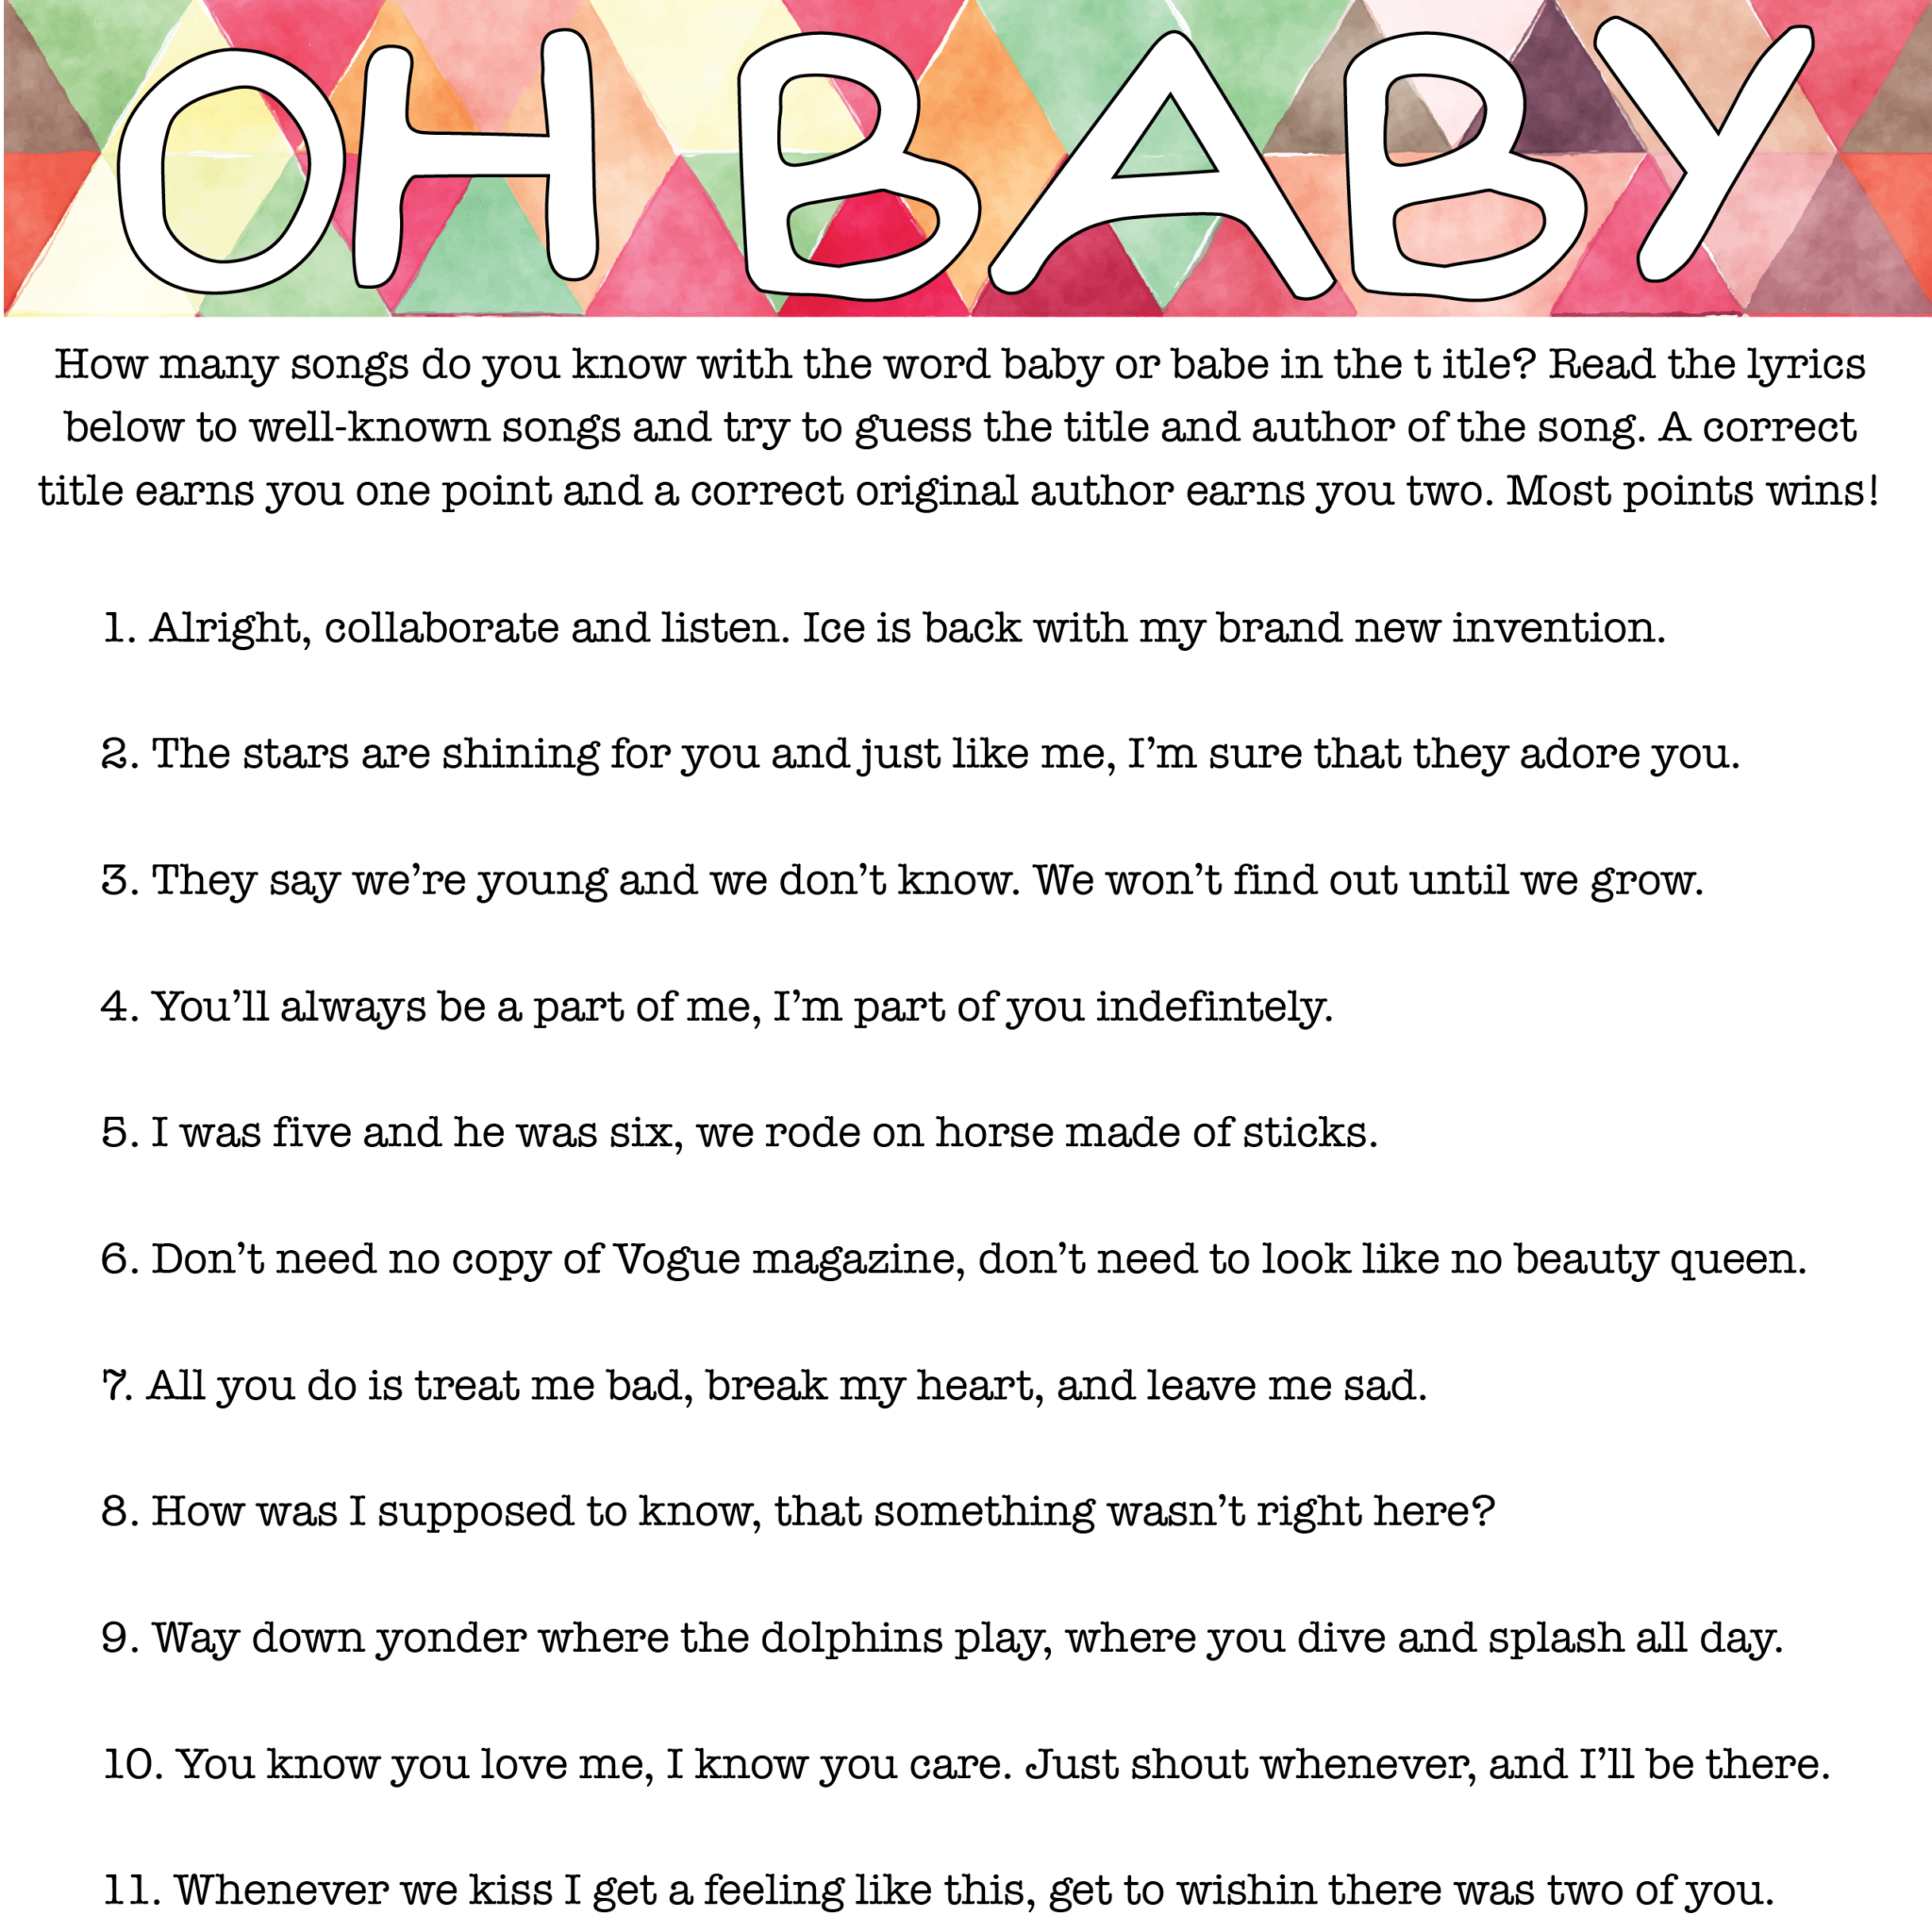 Free Printable Baby Shower Songs Guessing Game Play Party Plan